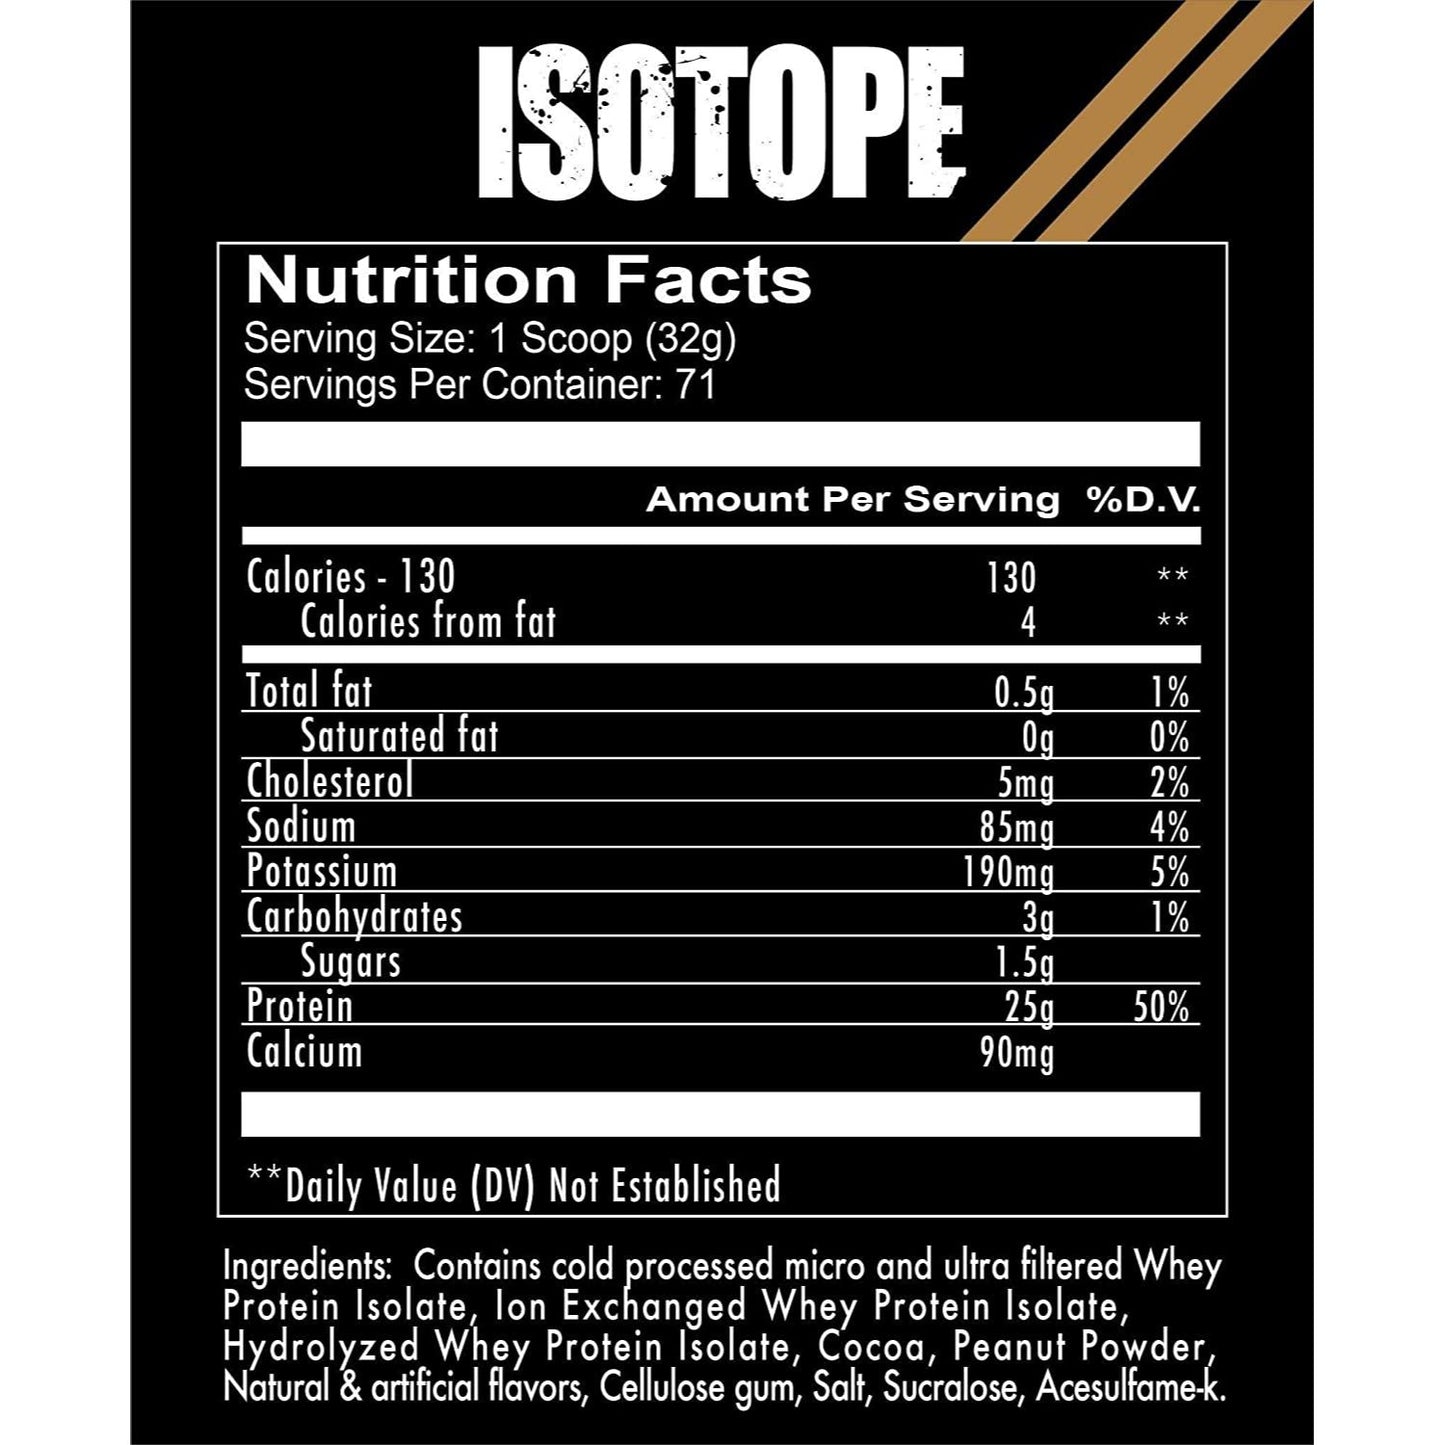 Redcon1 Isotope 100% Whey Protein Isolate, 2.27 kg (5 lb) - Redcon1 -